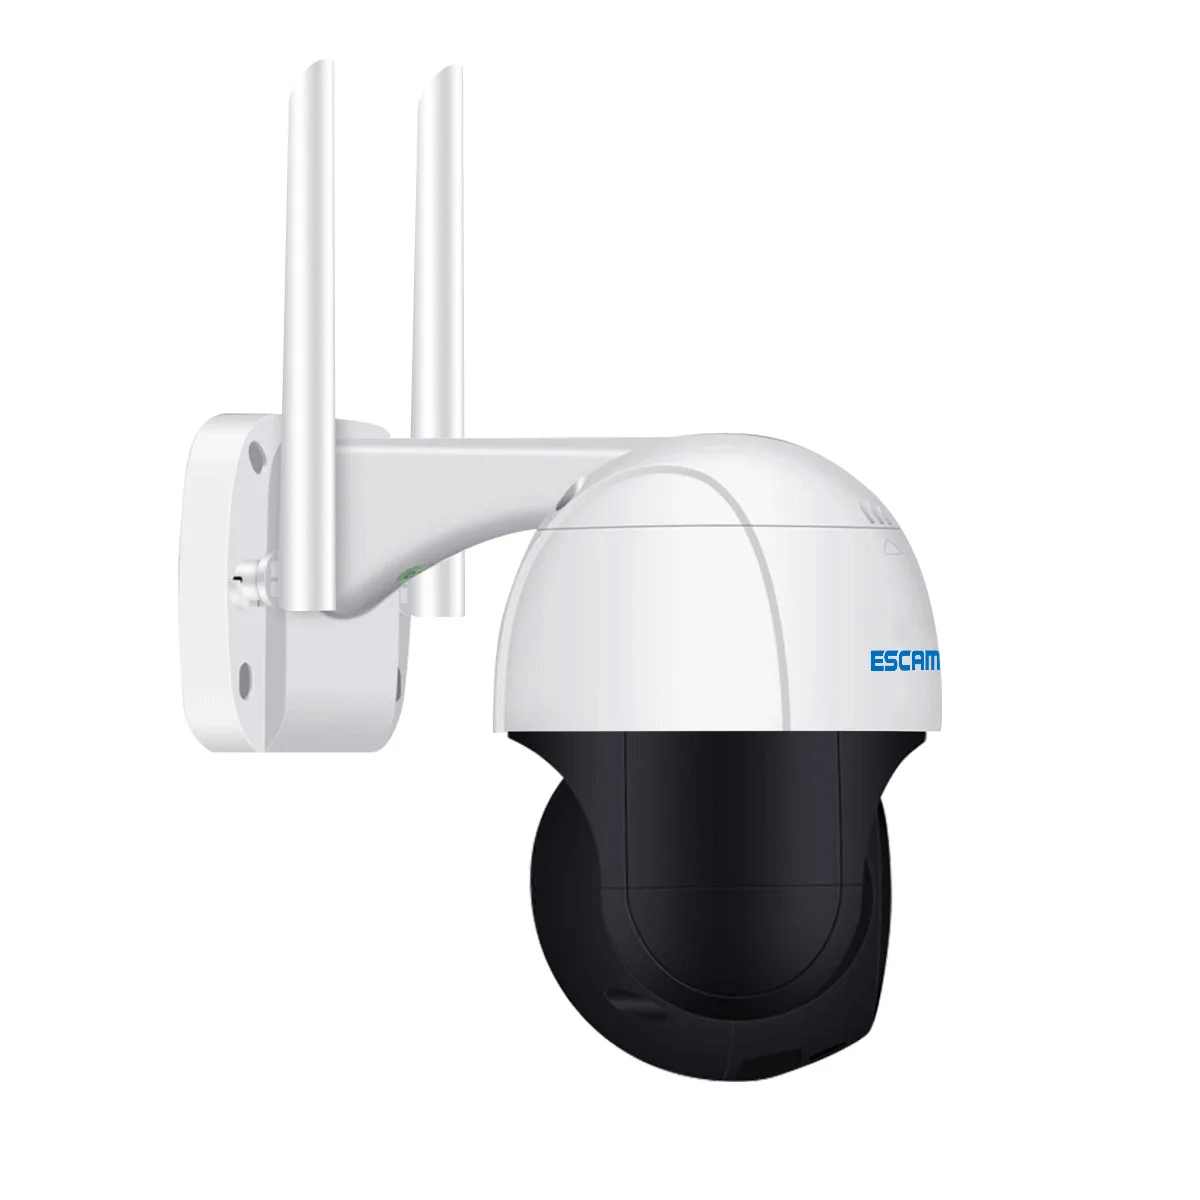 ESCAM QF518 5MP PTZ Wifi IP Camera AI Humanoid Detection Auto Tracking Outdoor Surveillance Security WiFi IP Camera Waterproof